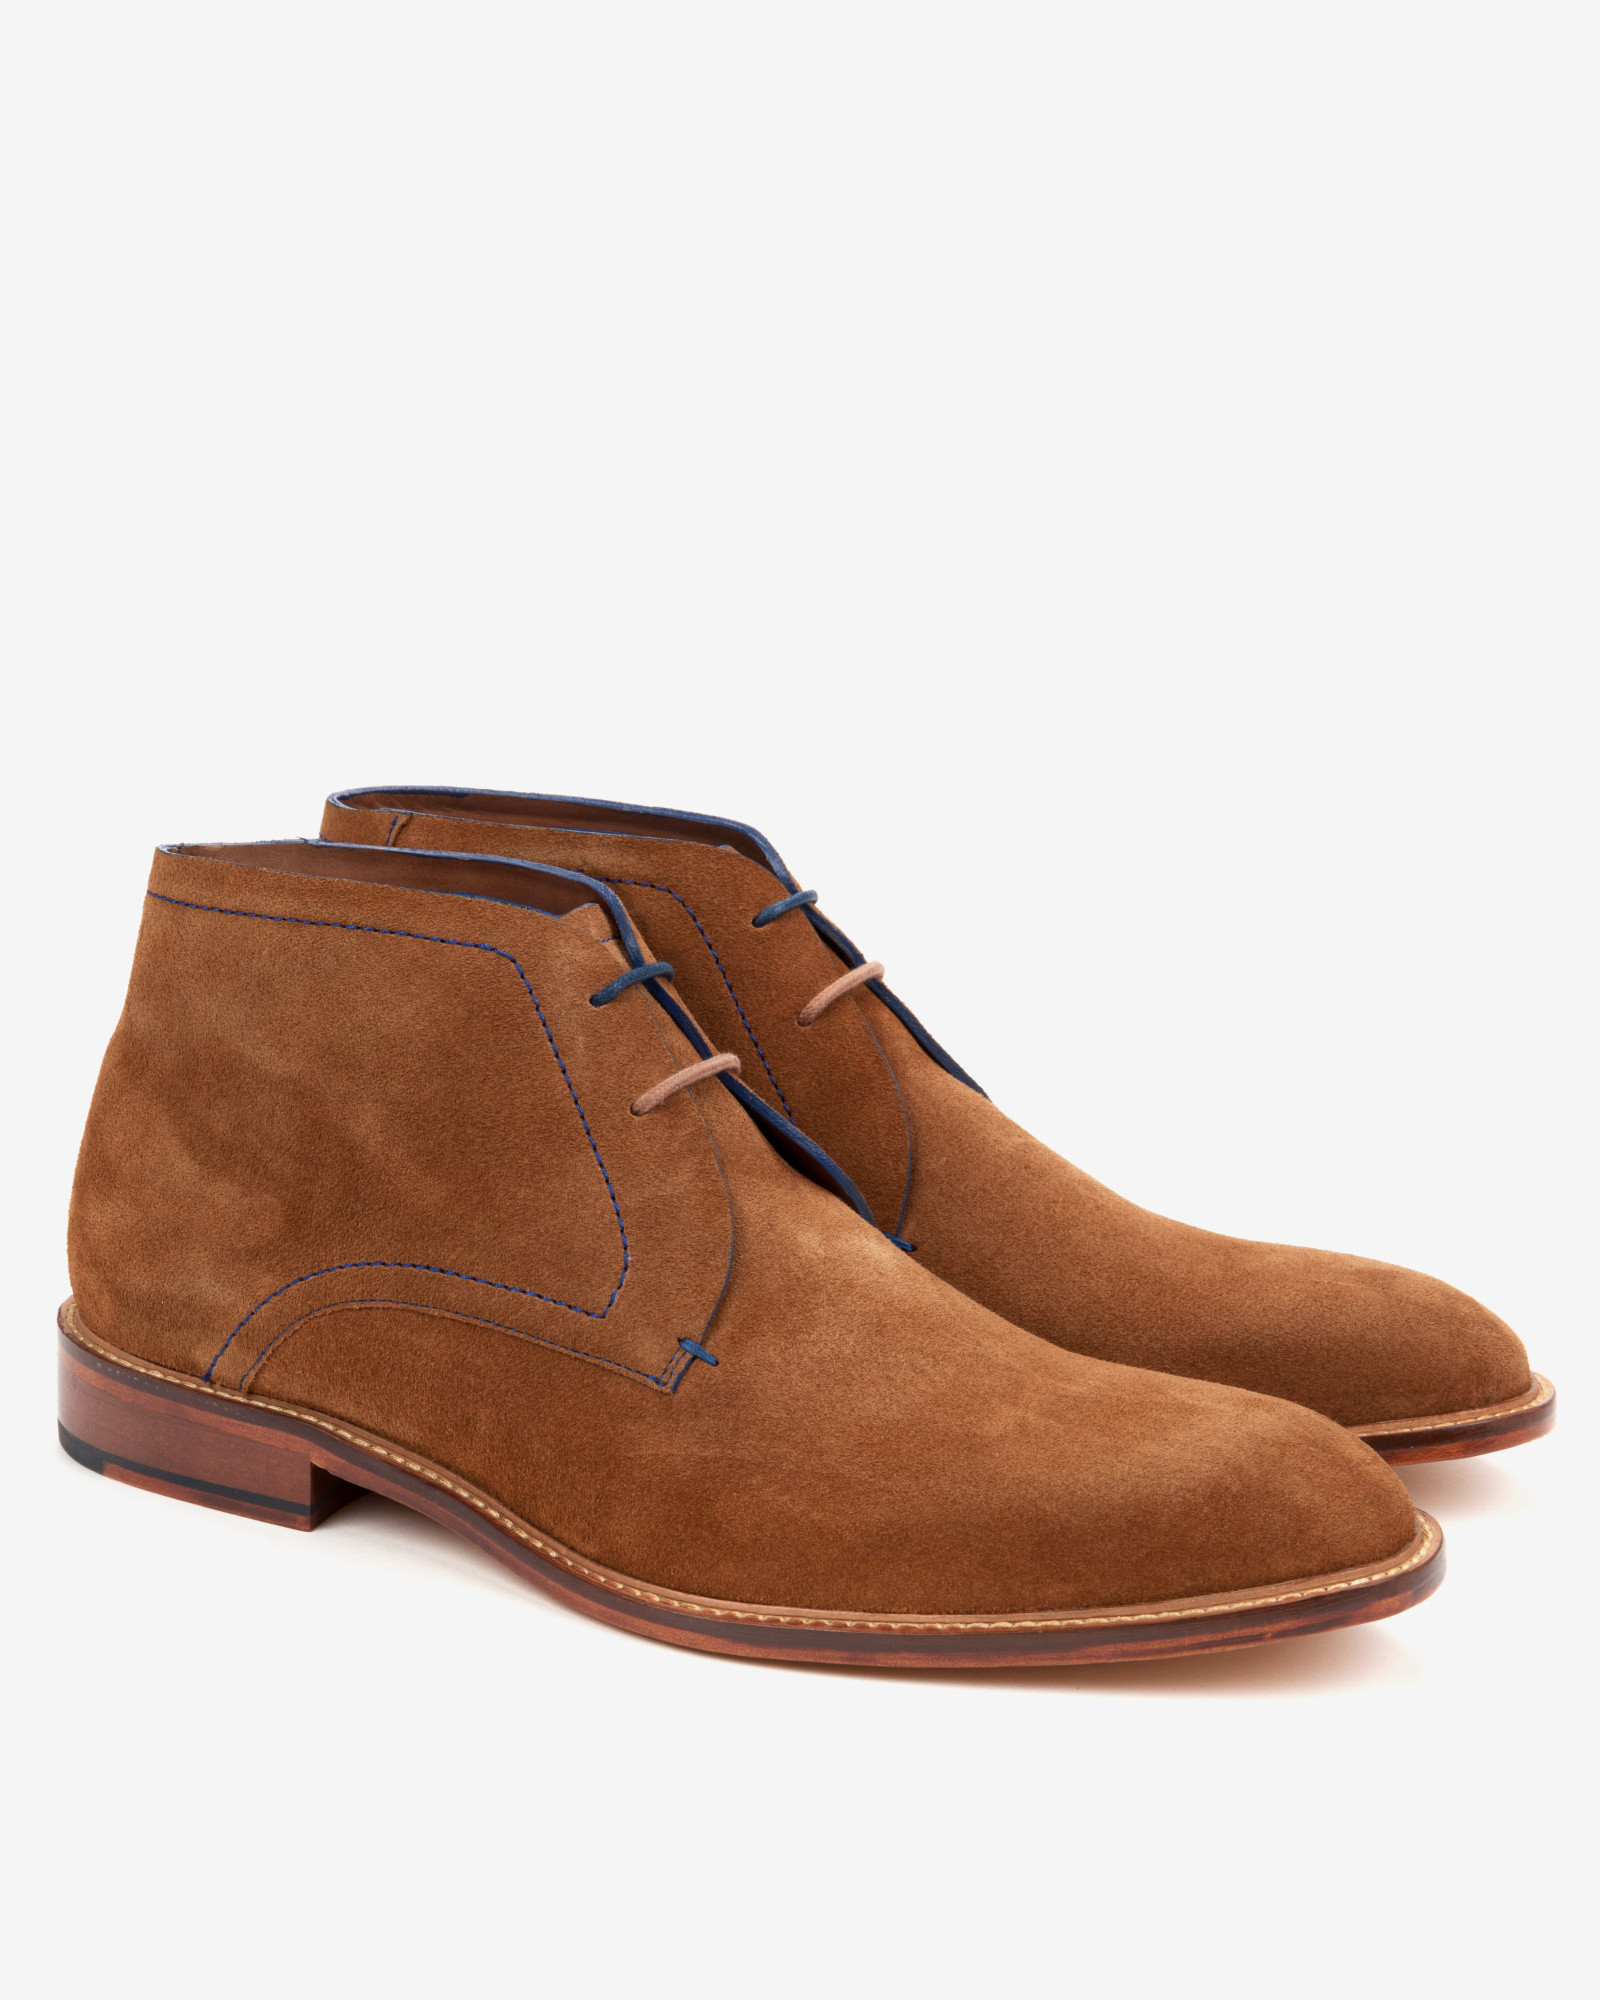 Ted Baker Men's DEKSTA Tan Leather Lace-up Chukka Ankle Boots  £160 